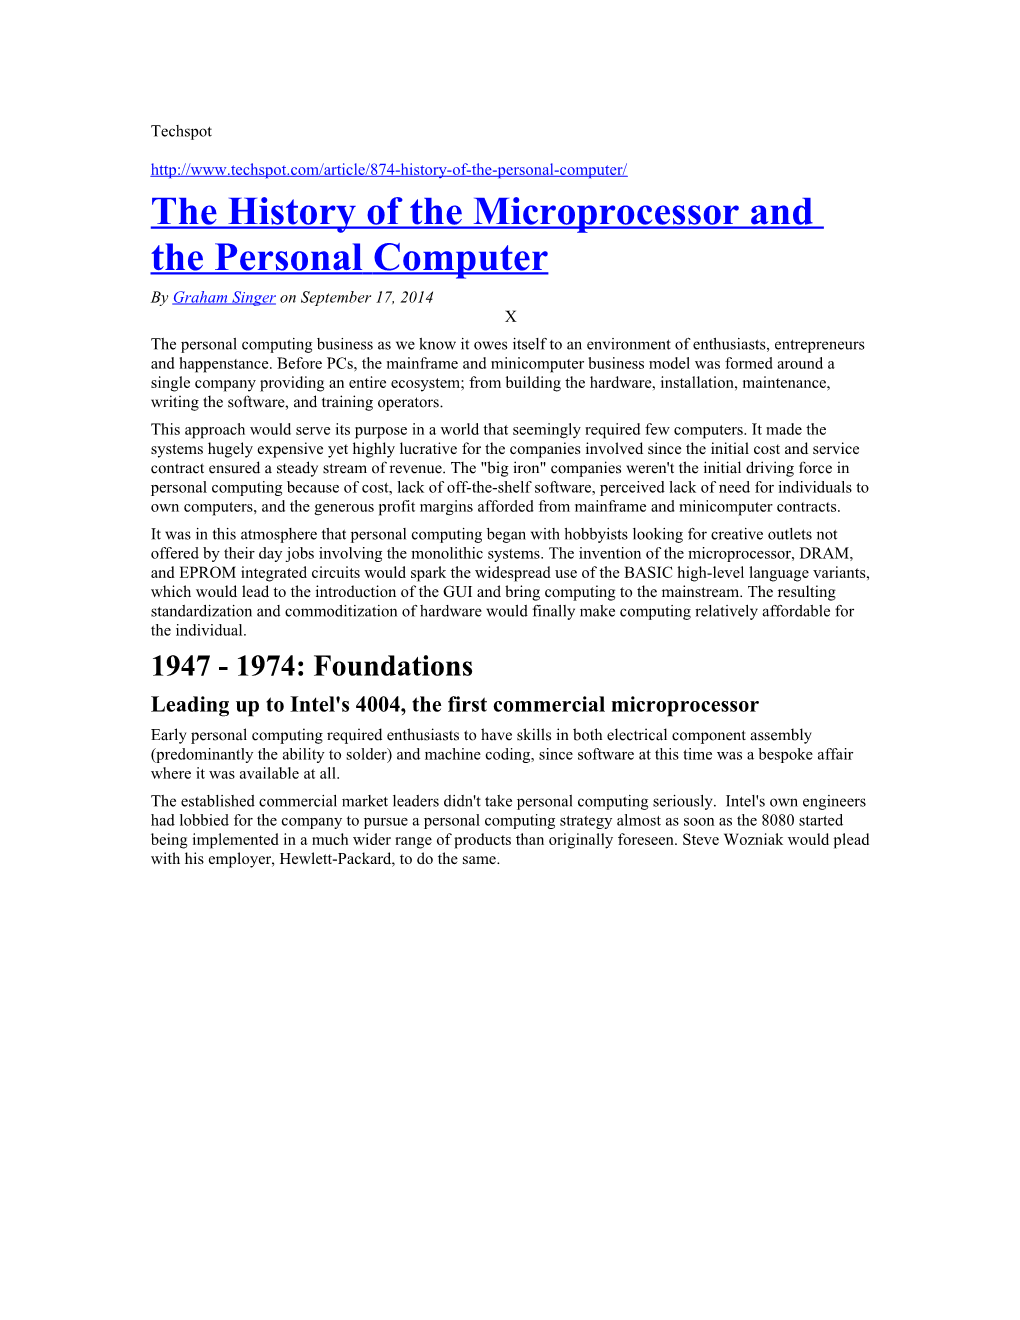 The History of the Microprocessor and the Personalcomputer